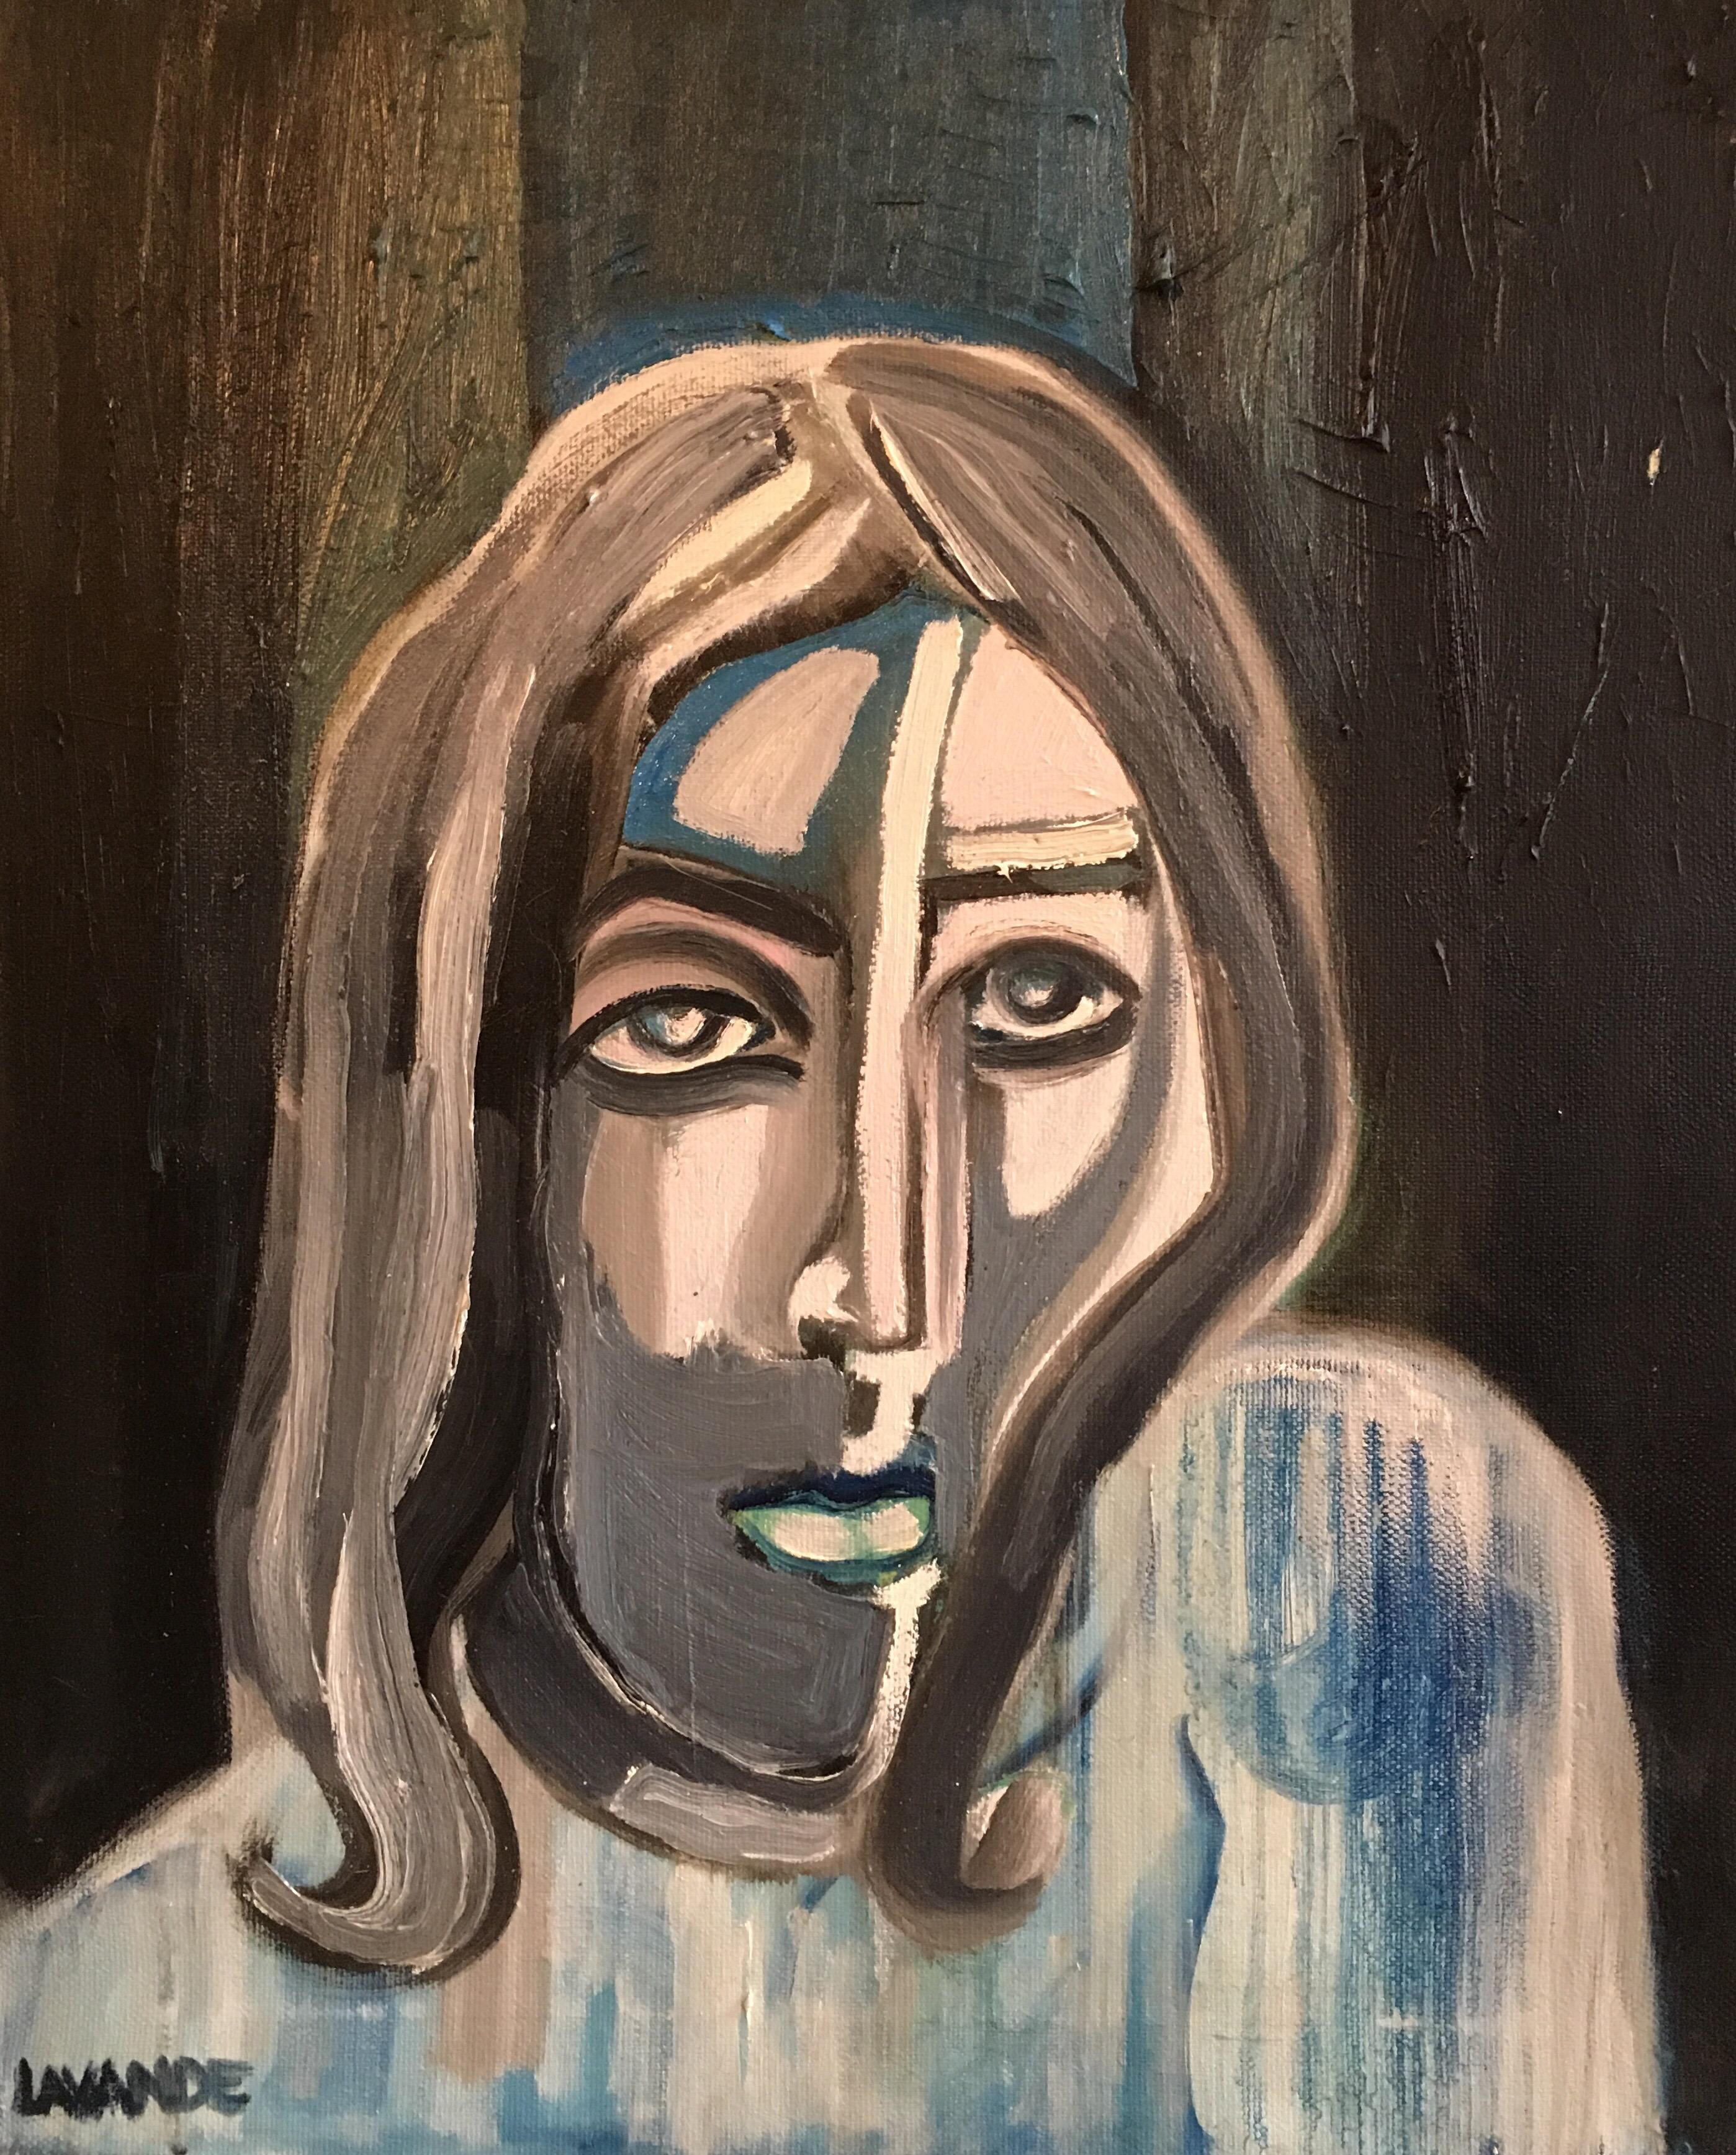 Dark Picasso Style Portrait, Cubist Abstract, Original Oil Painting, Signed 